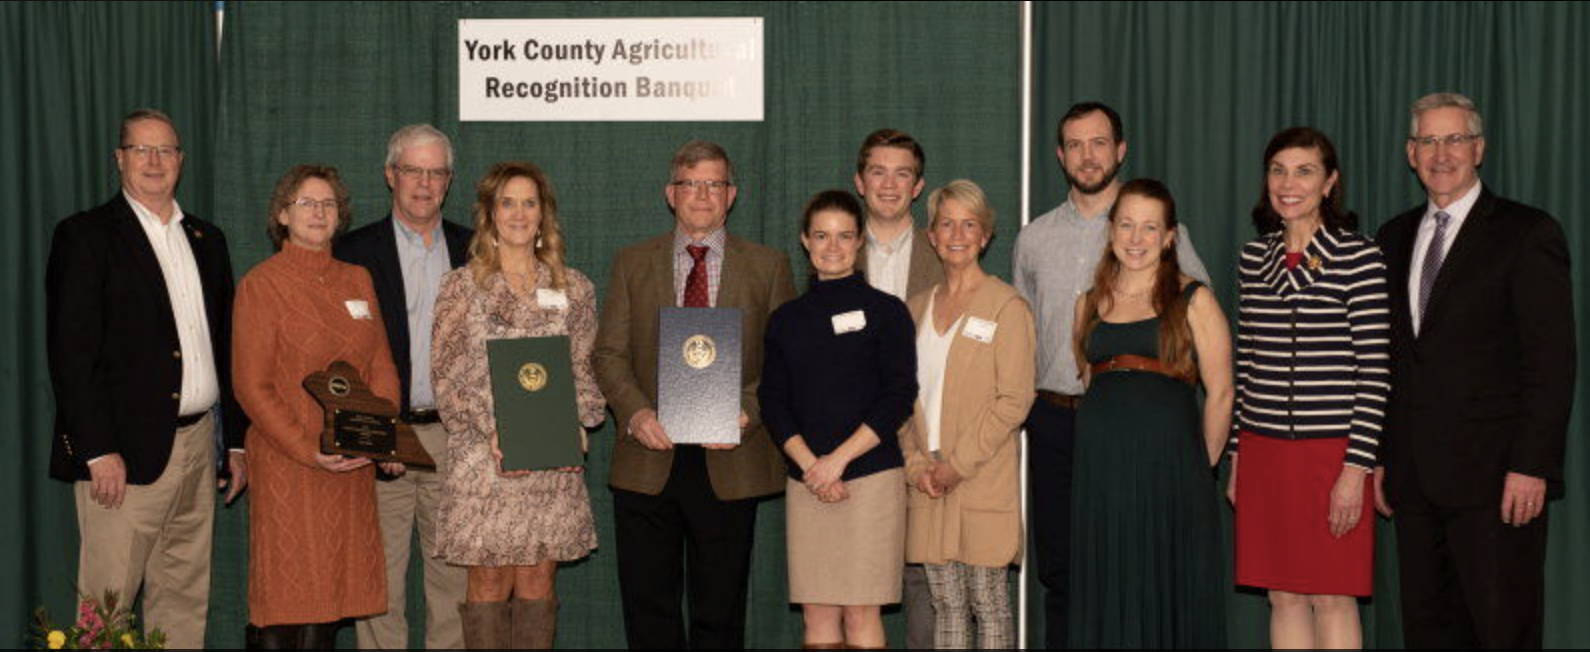 The Mill receives the outstanding ag business award at the York County banquet